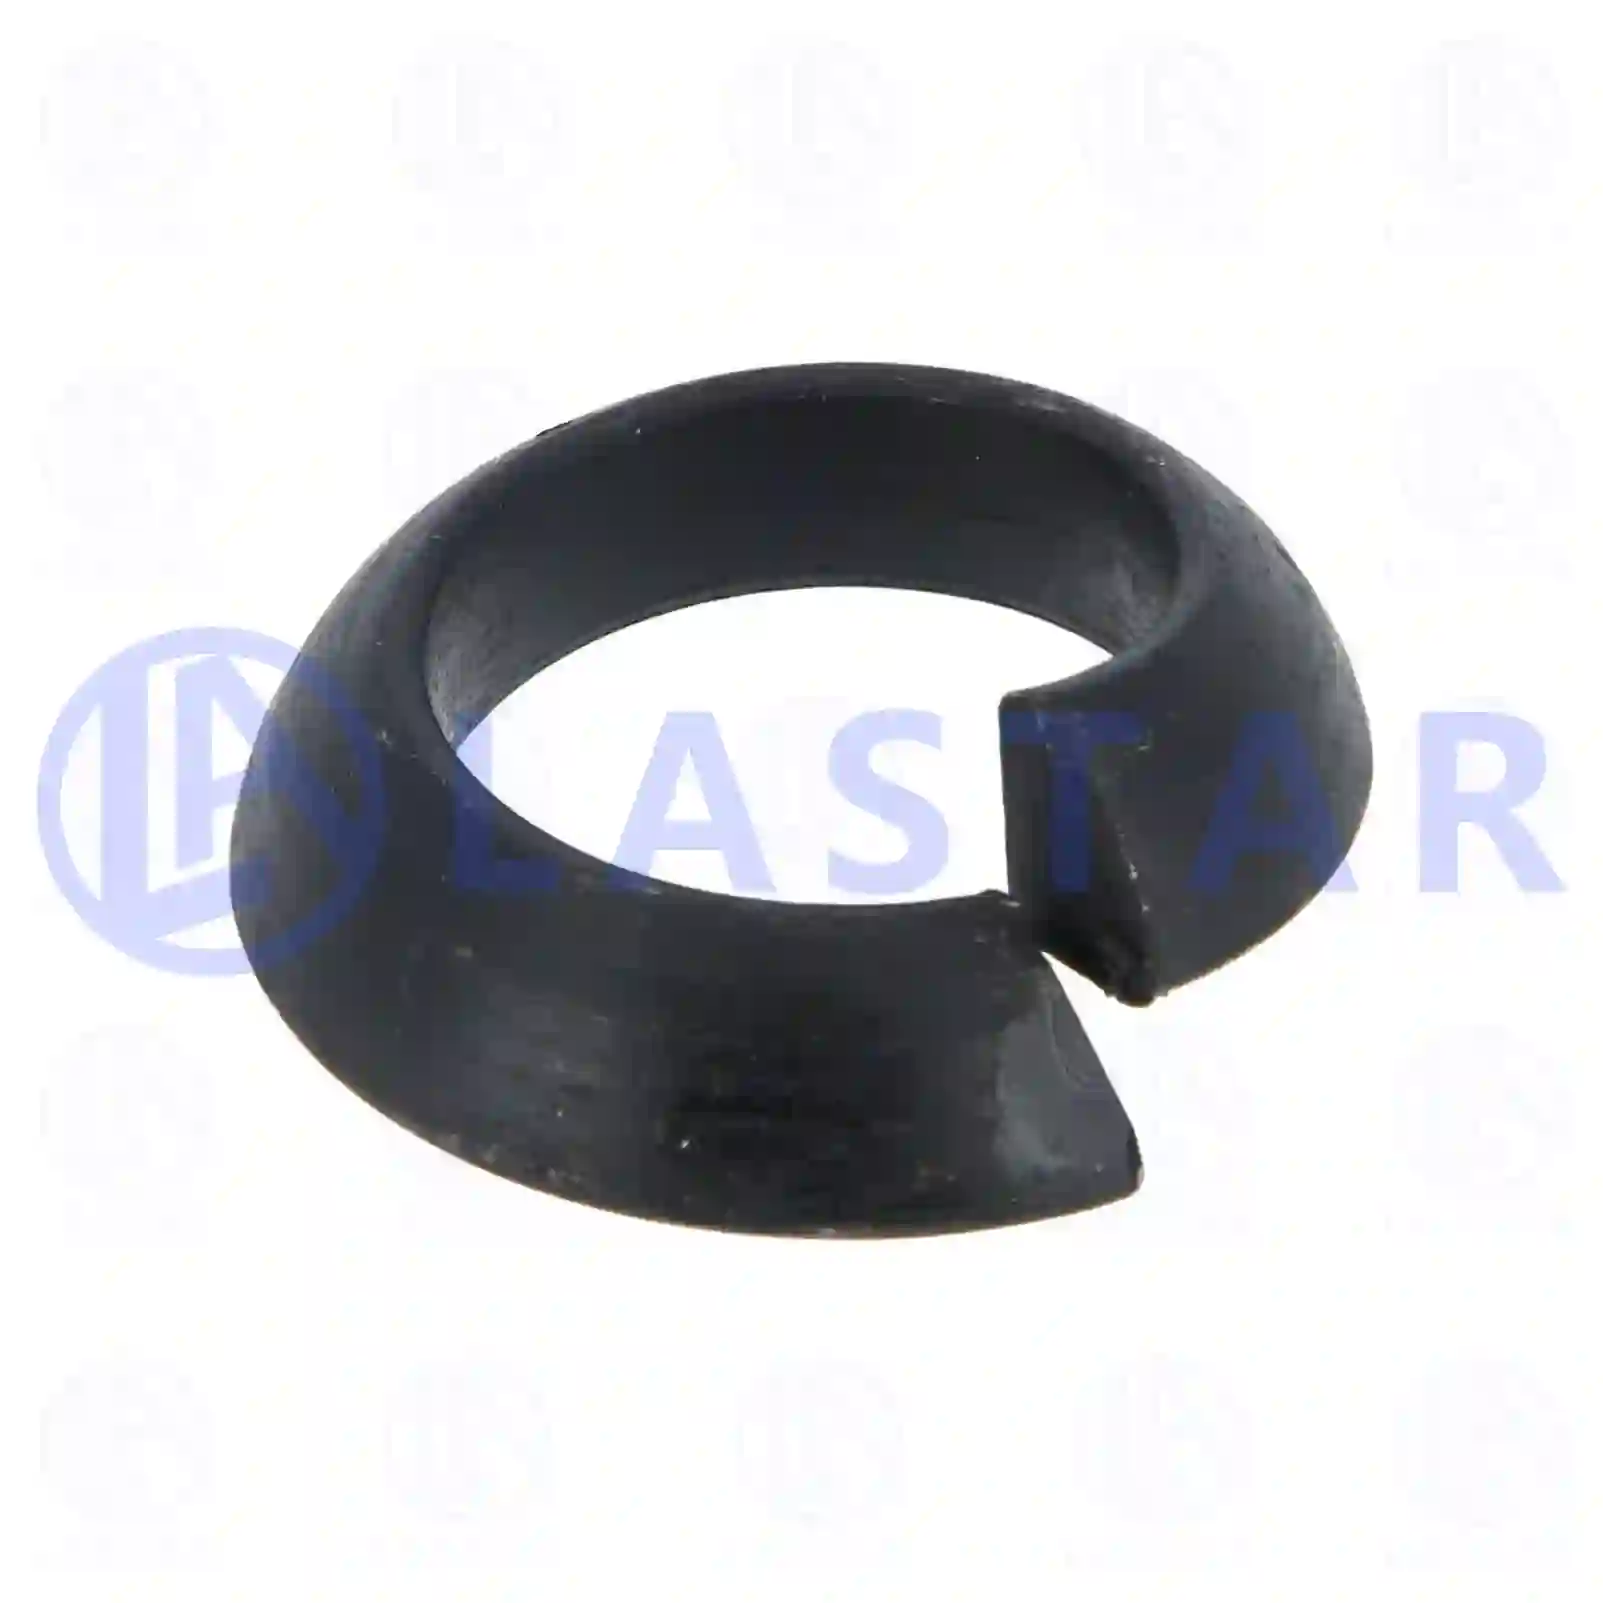  Spring ring || Lastar Spare Part | Truck Spare Parts, Auotomotive Spare Parts